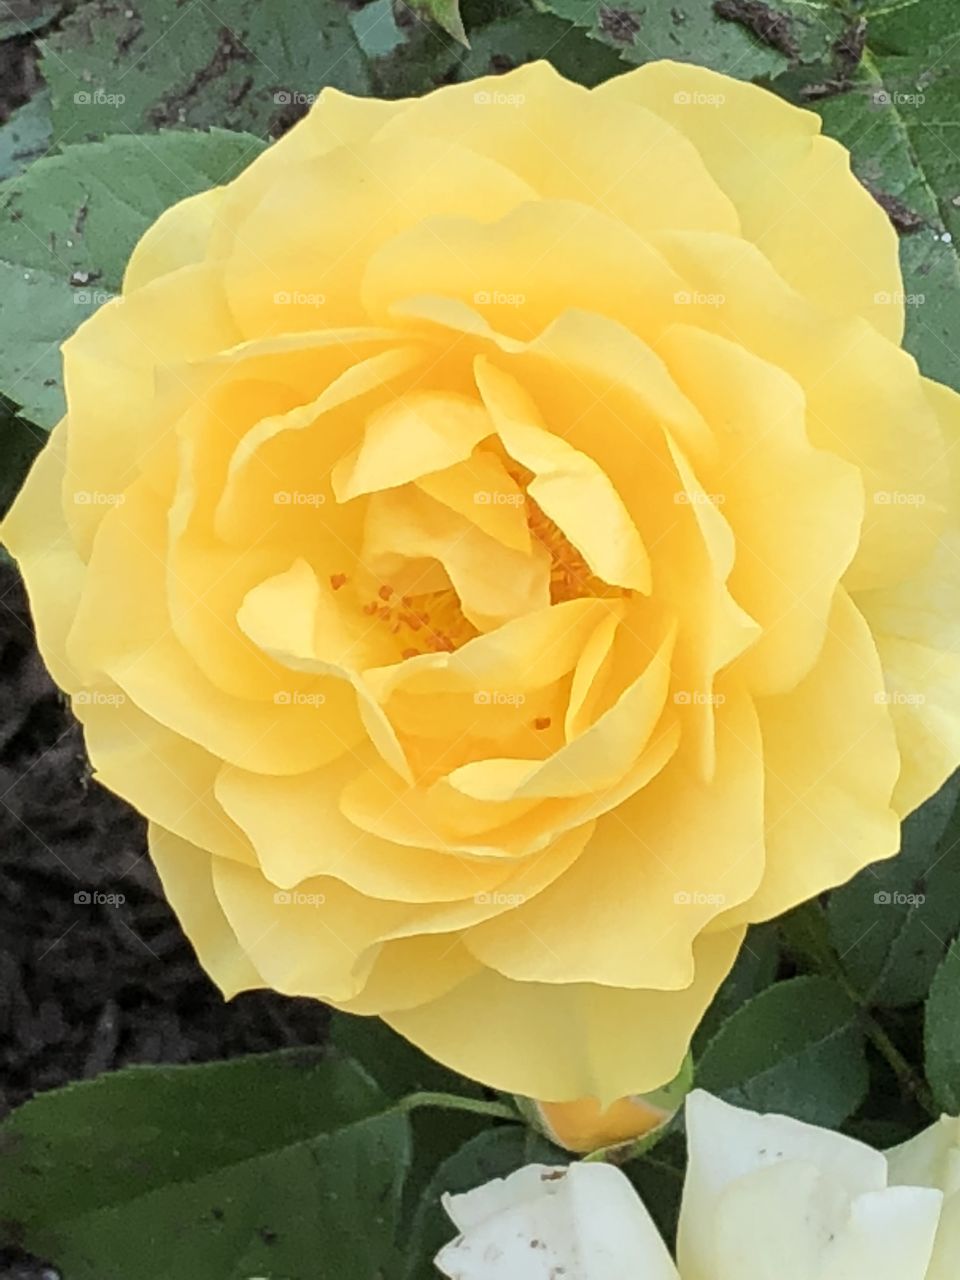 A beautiful yellow rose taken from the rose garden in Colonial Park in Somerset, NJ. 